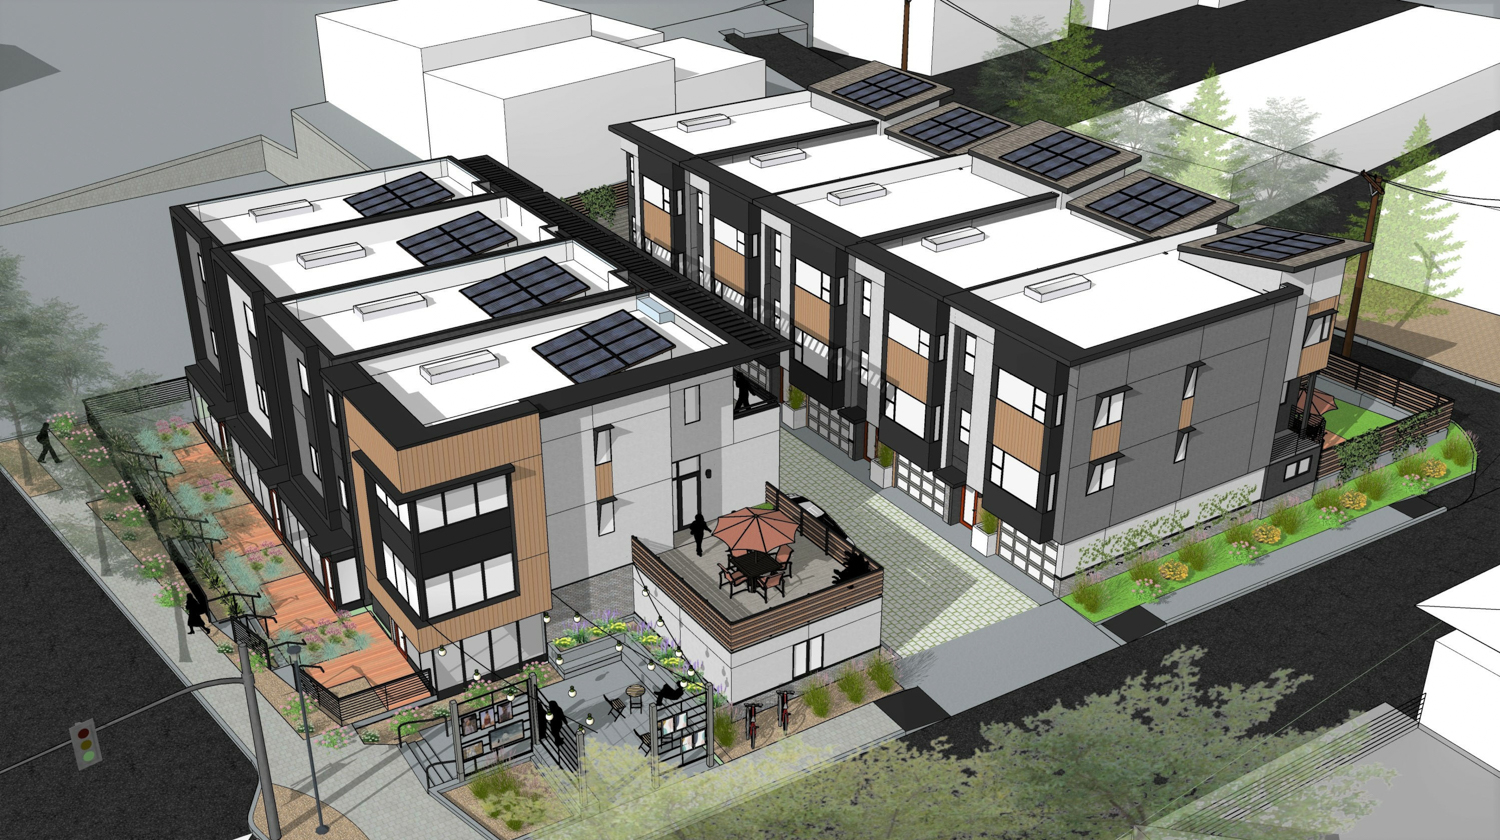 3458 Mount Diablo Boulevard overall aerial view, rendering by Coast Architecture and Design